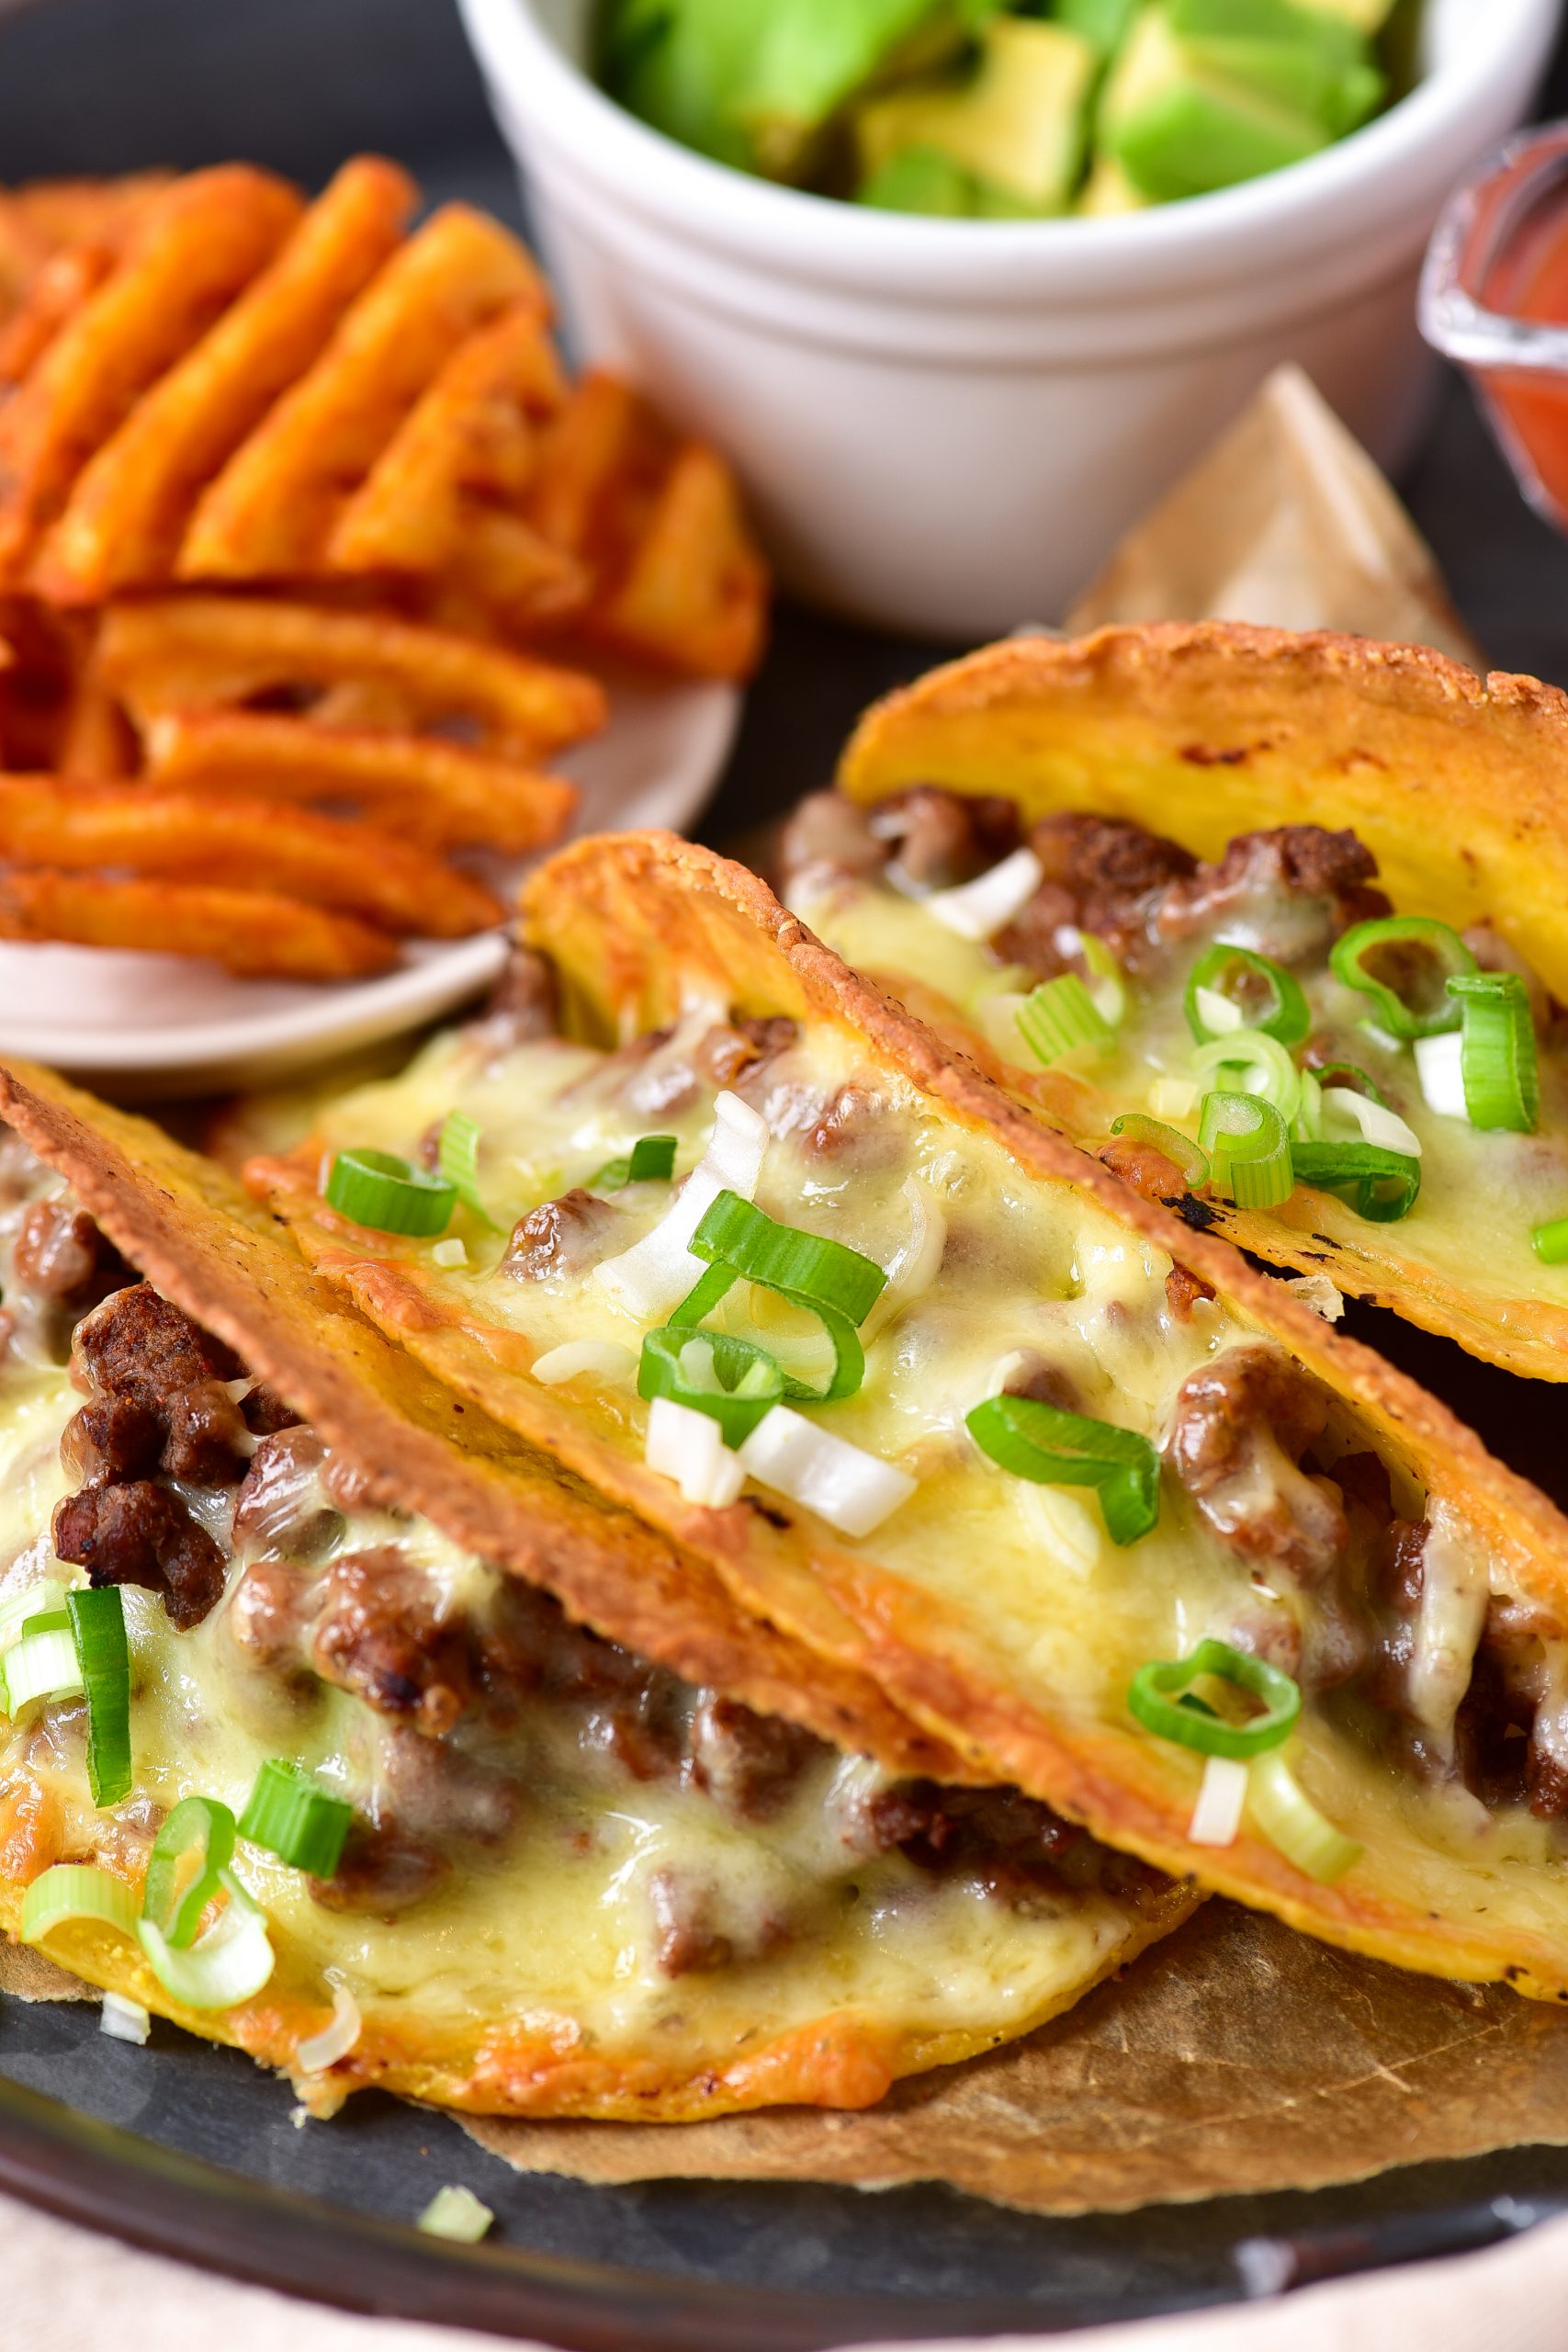 Cheesesteak Tacos with Buffalo Fries, cheesesteak tacos, cheesesteak and tacos, steak and cheese tacos